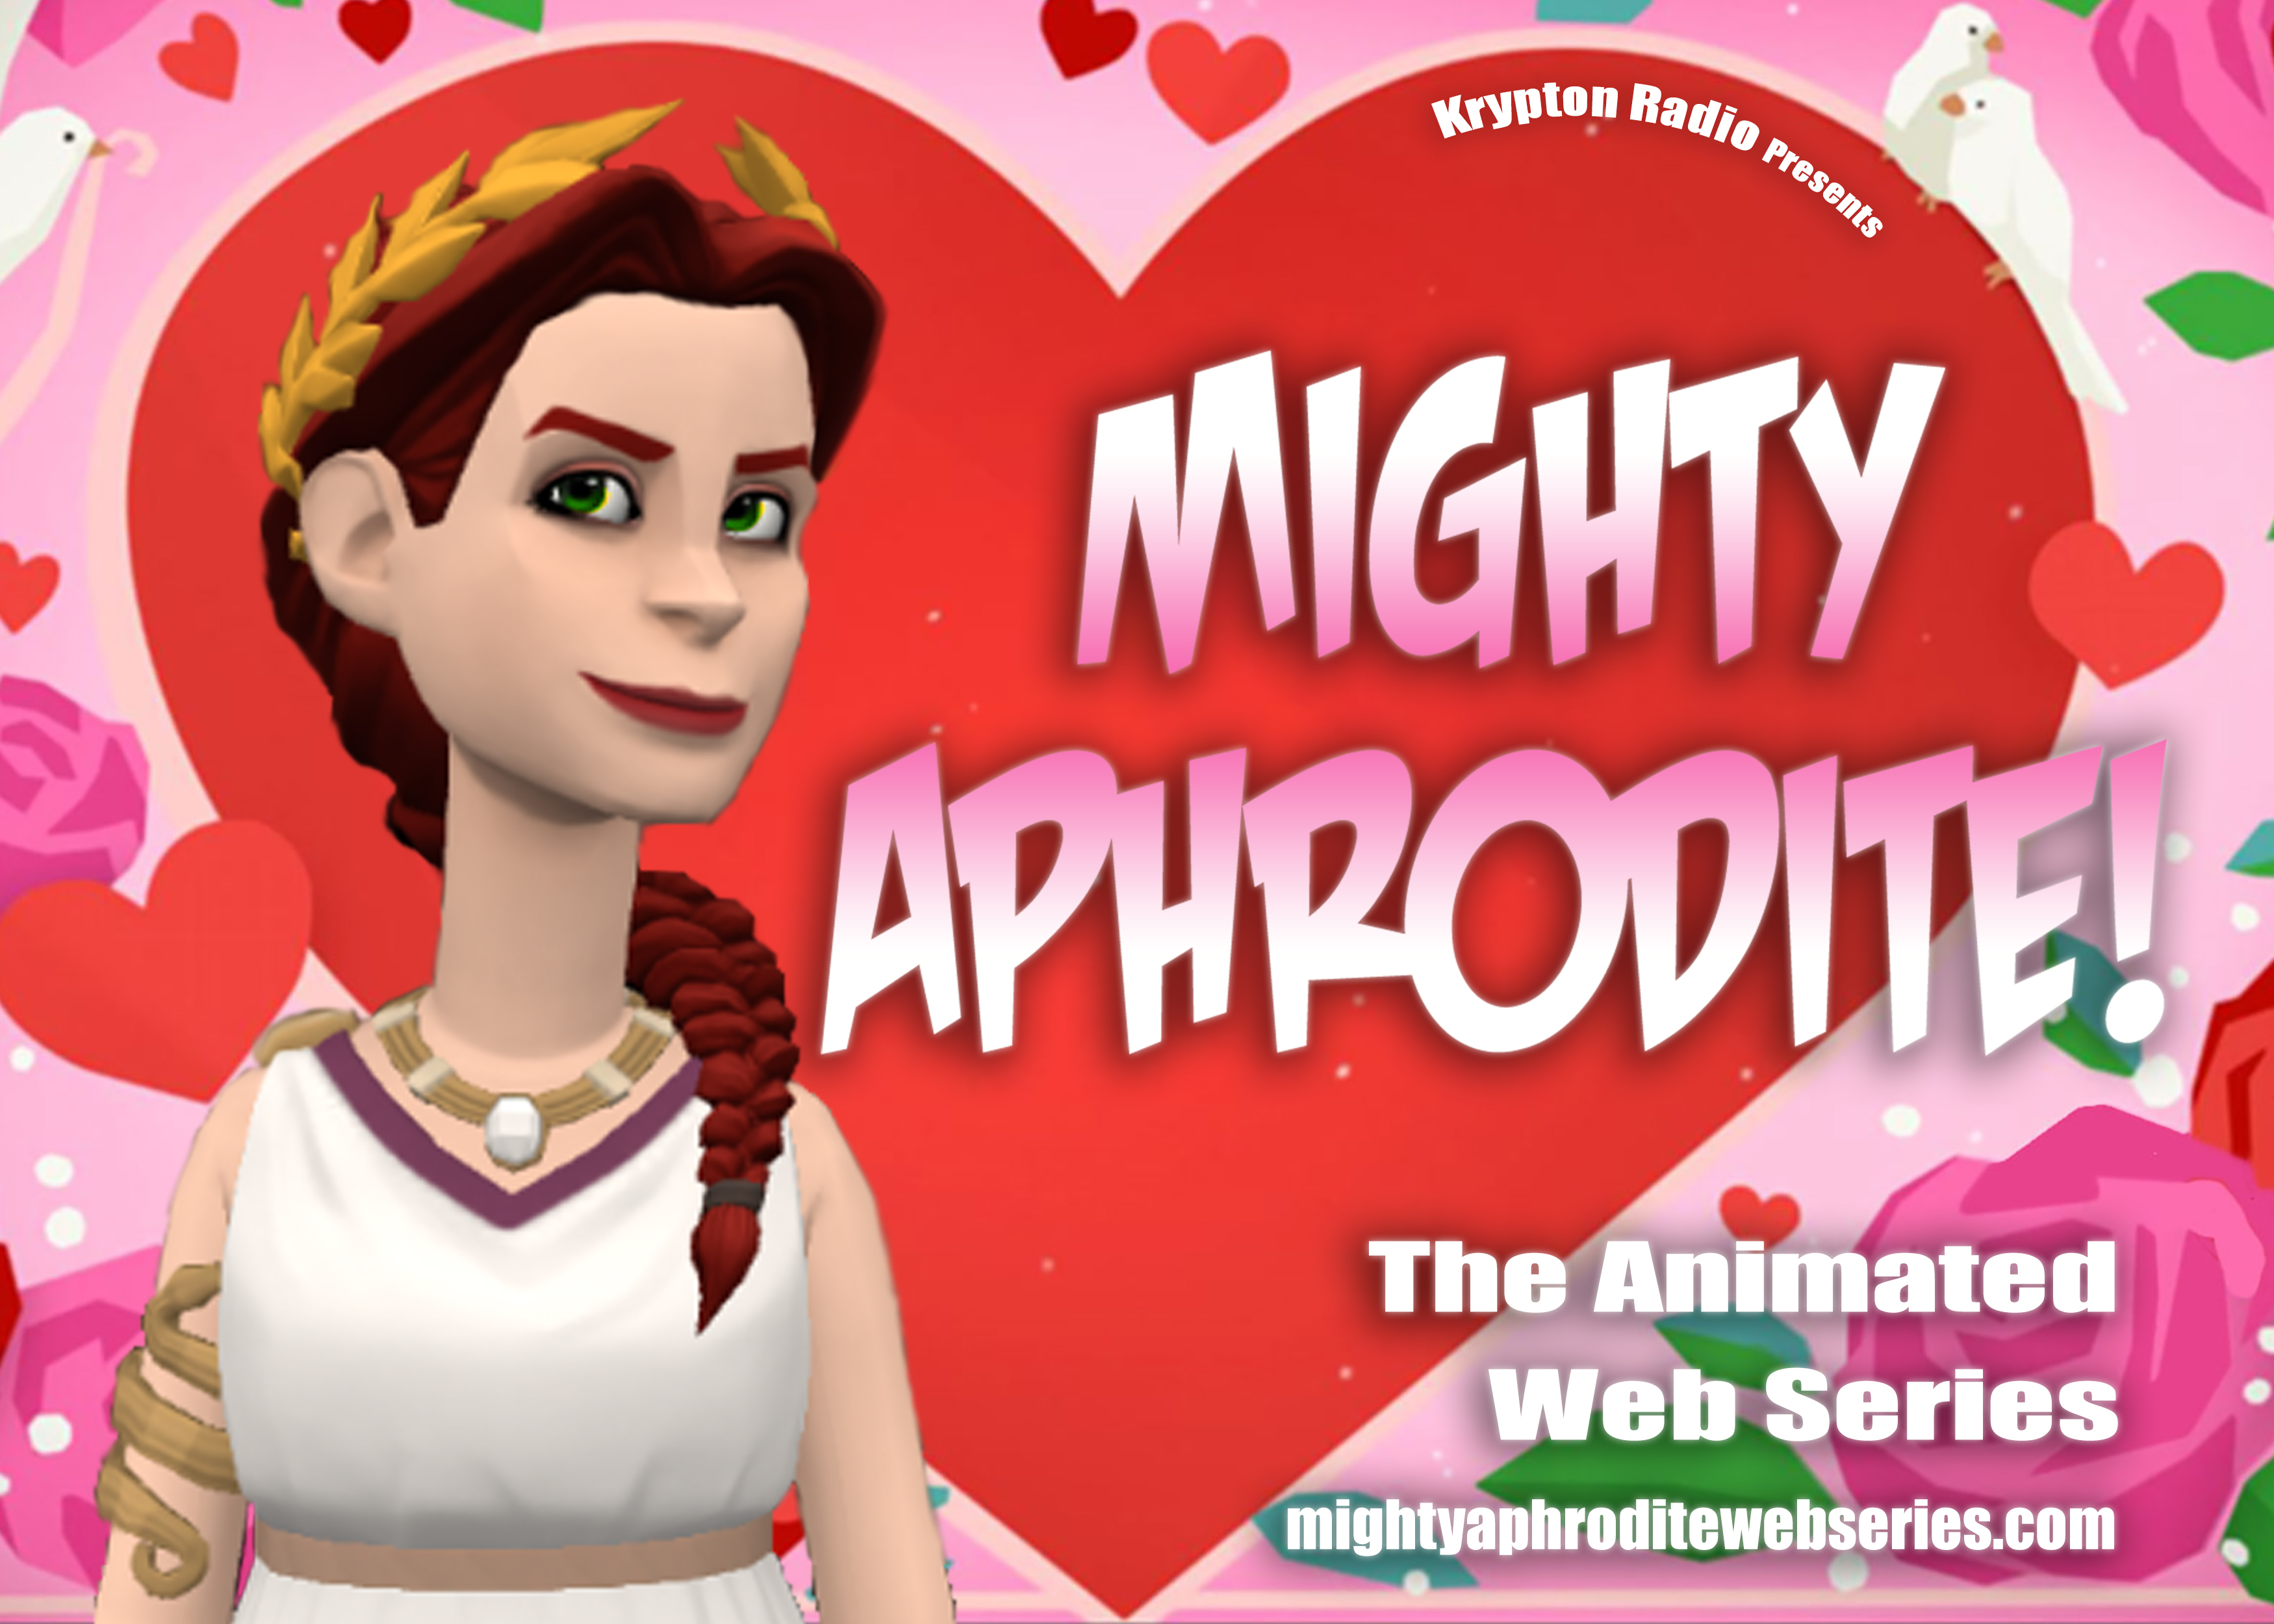 Mighty Aphrodite! The Web Series